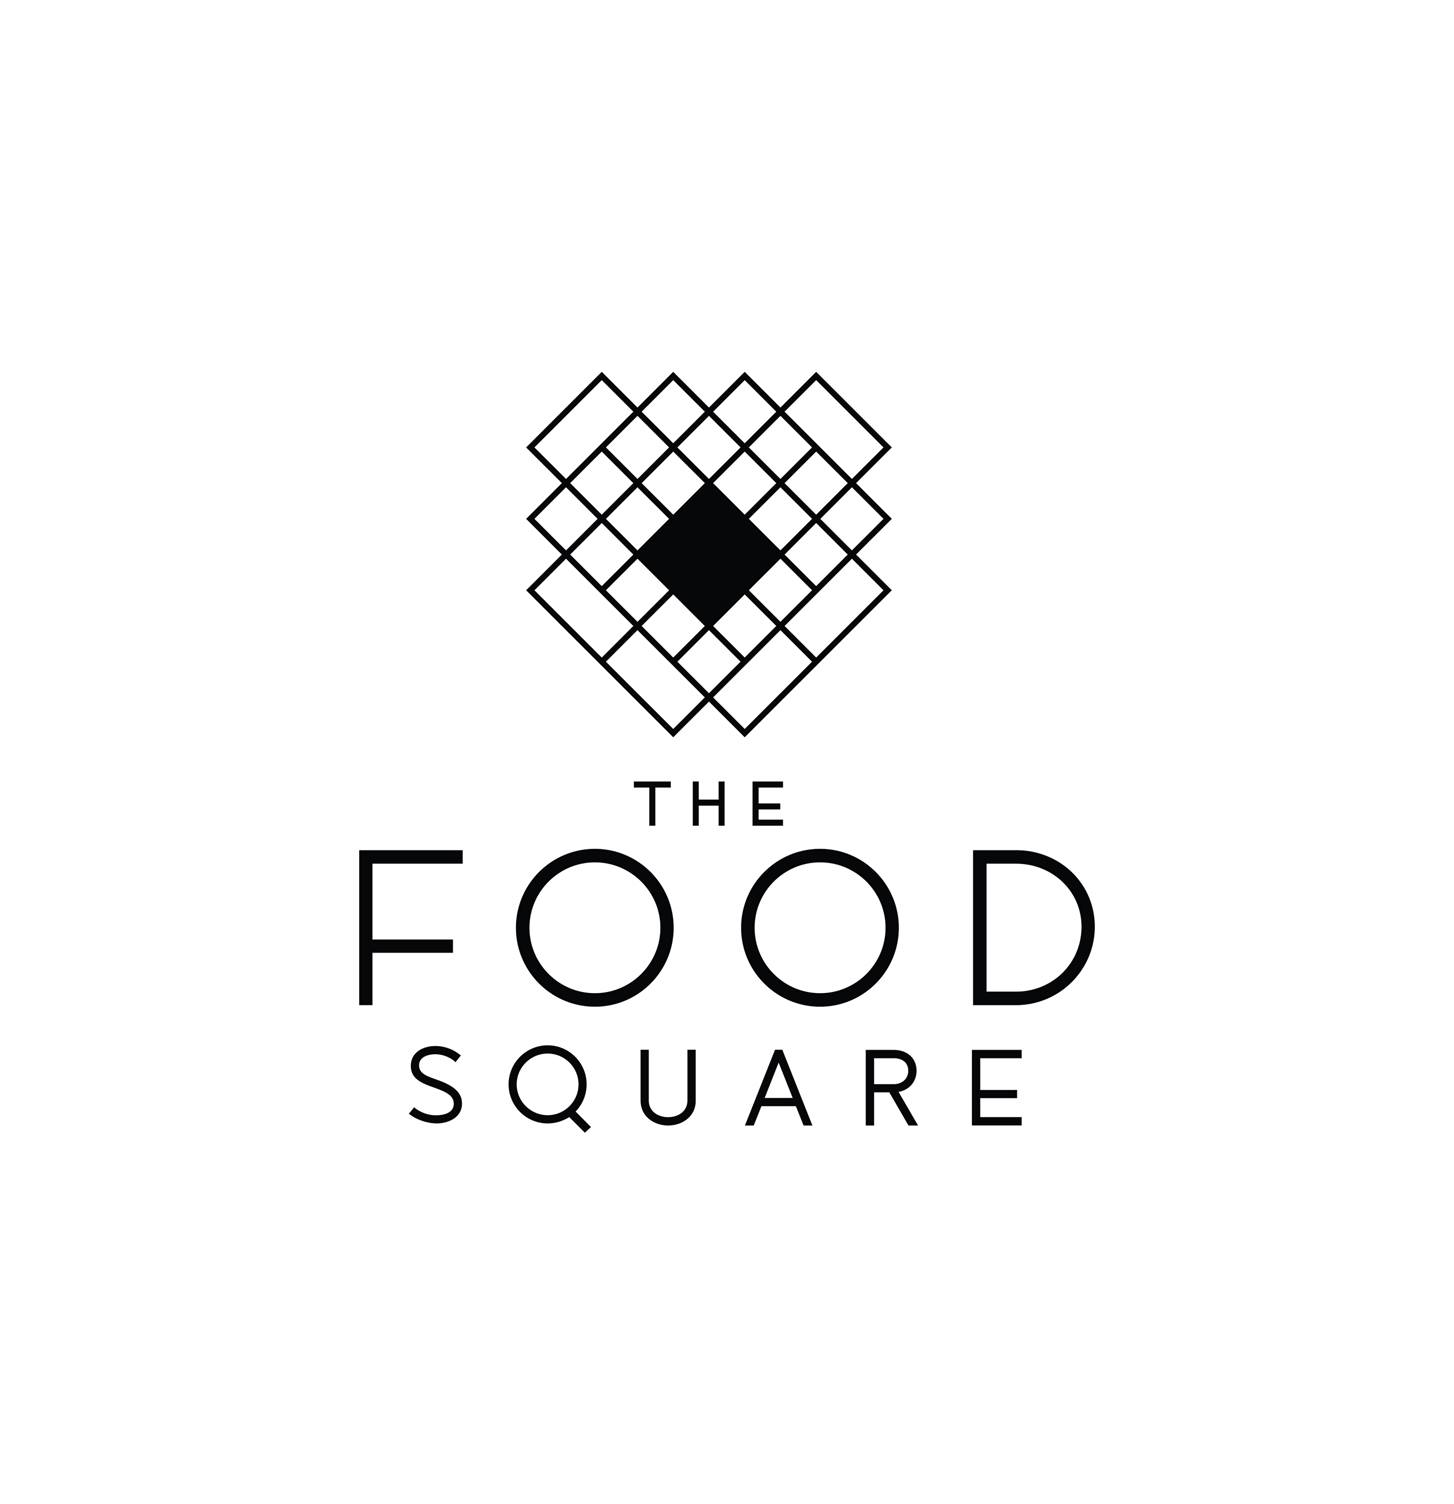 The Food Square - Coming Soon in UAE